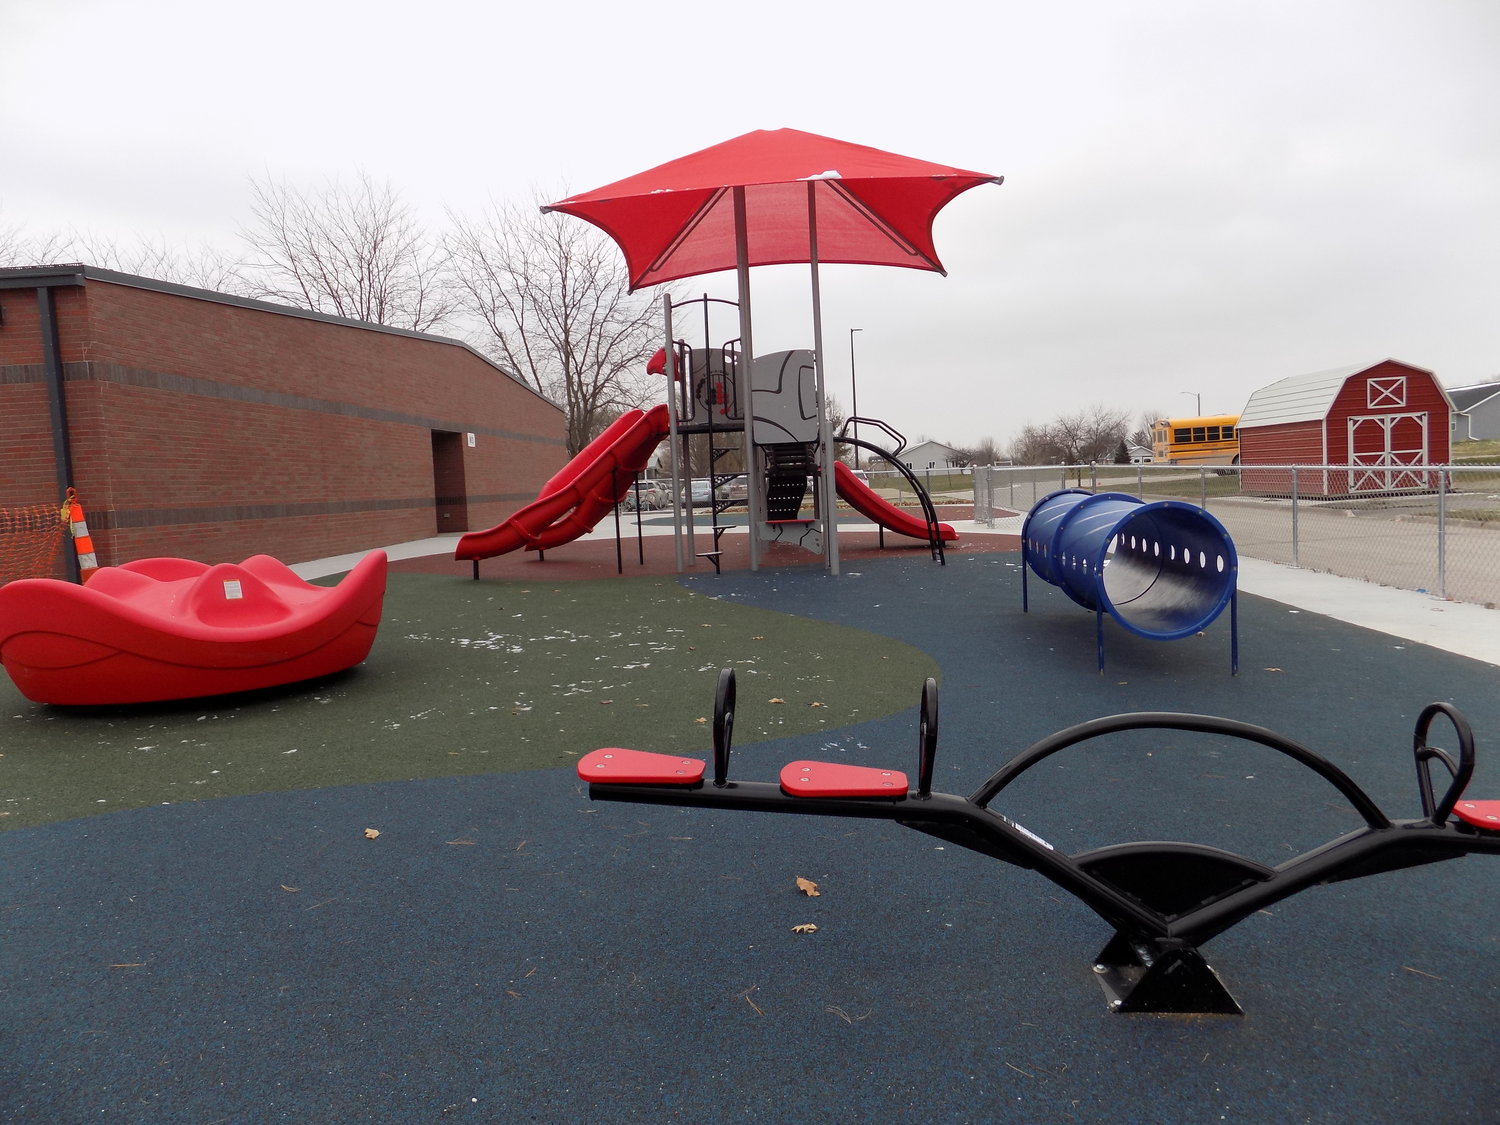 Colorful new equipment with a soft surface underfoot invites students to enjoy an active recess.